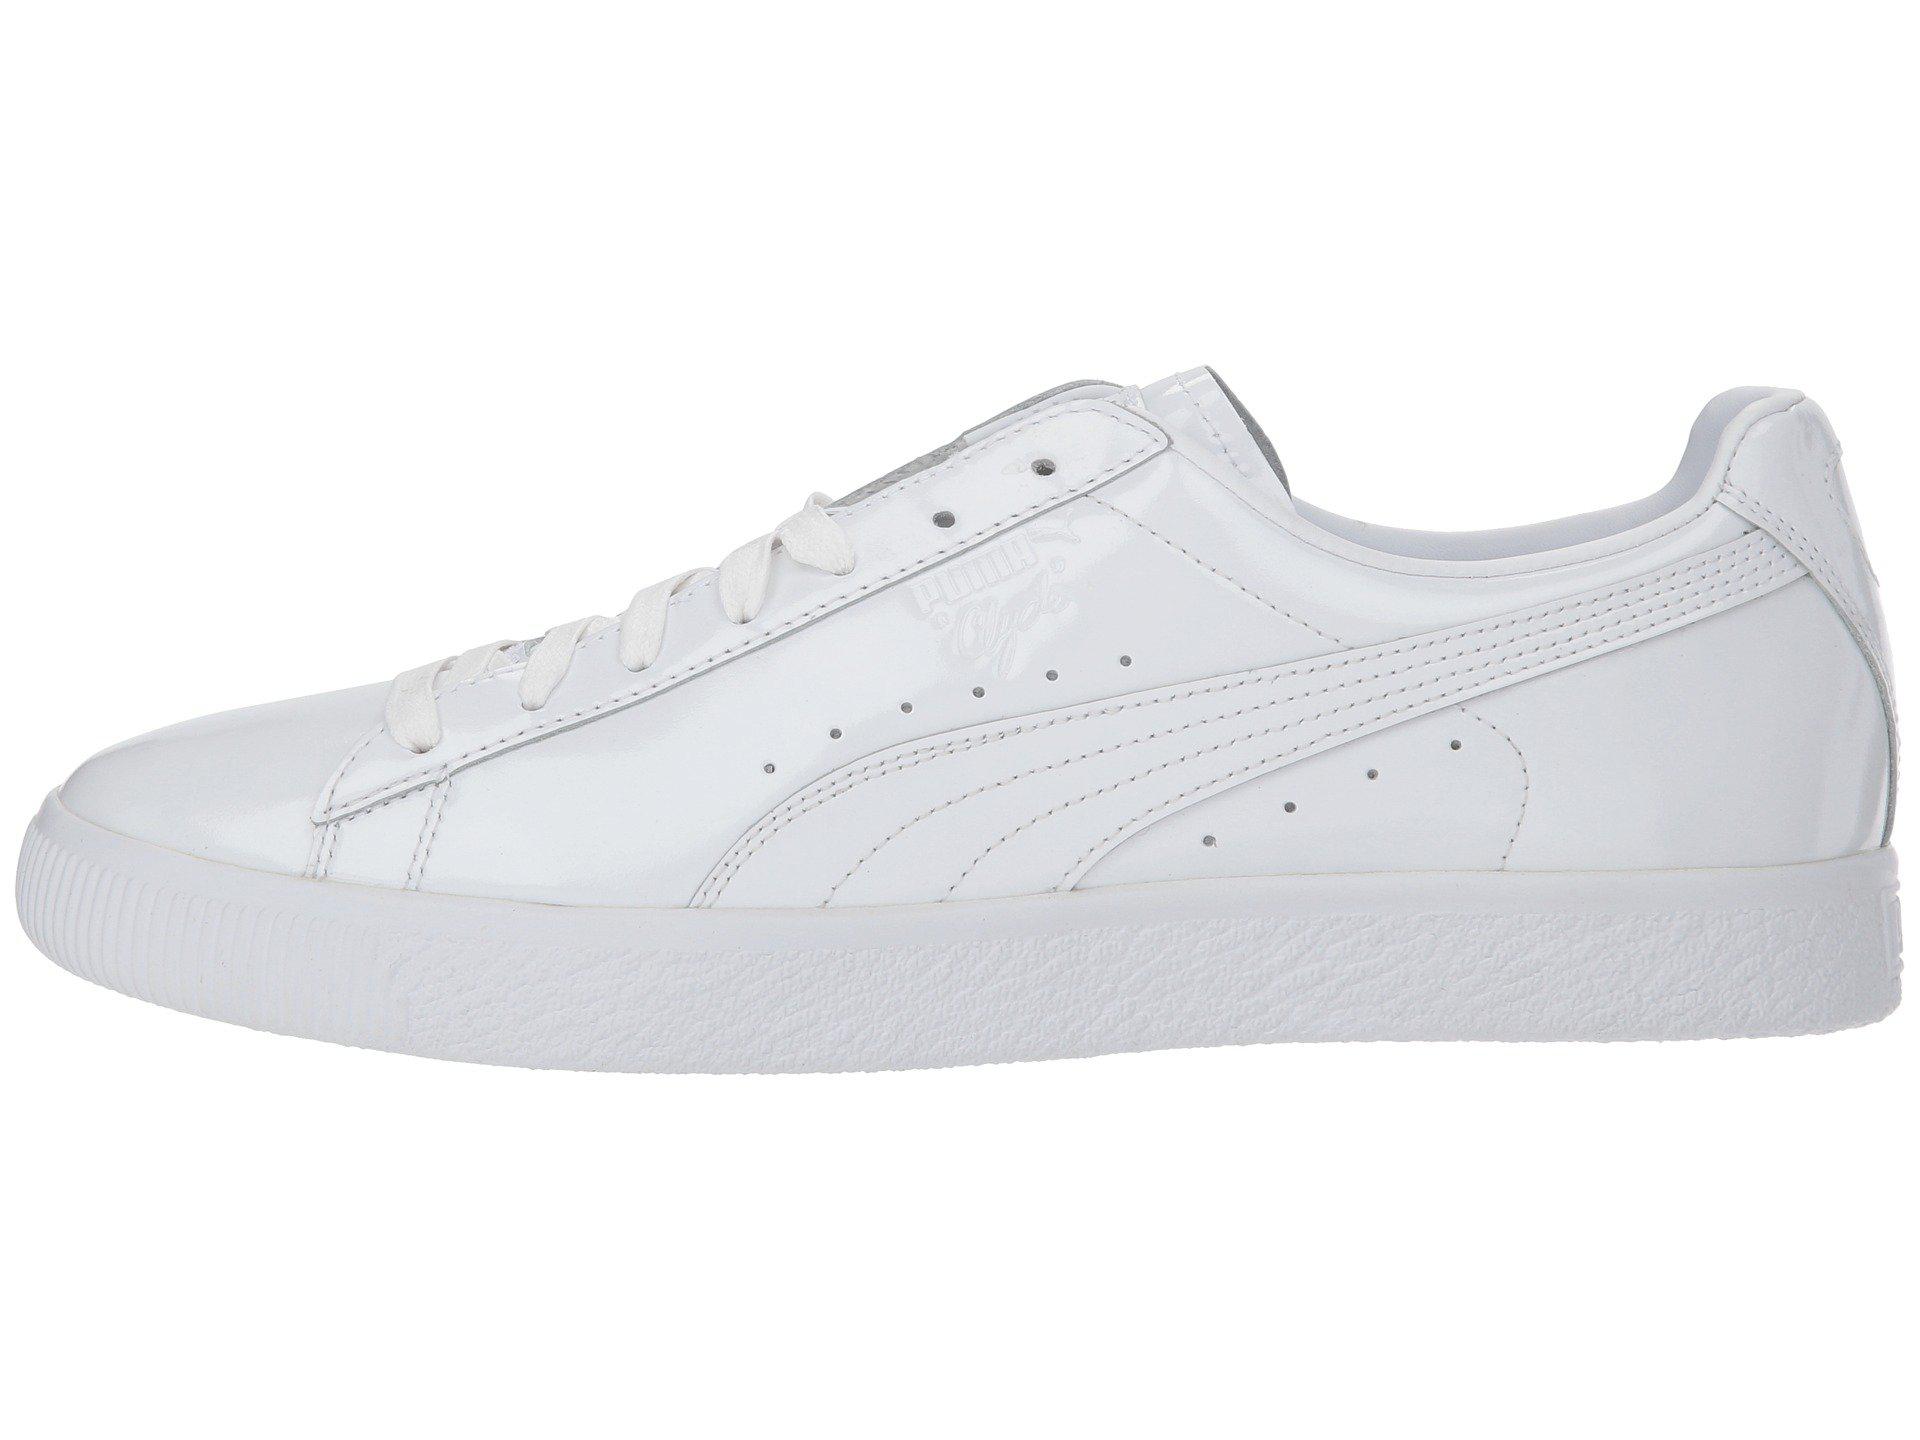 PUMA Leather Clyde Dressed Part Three 